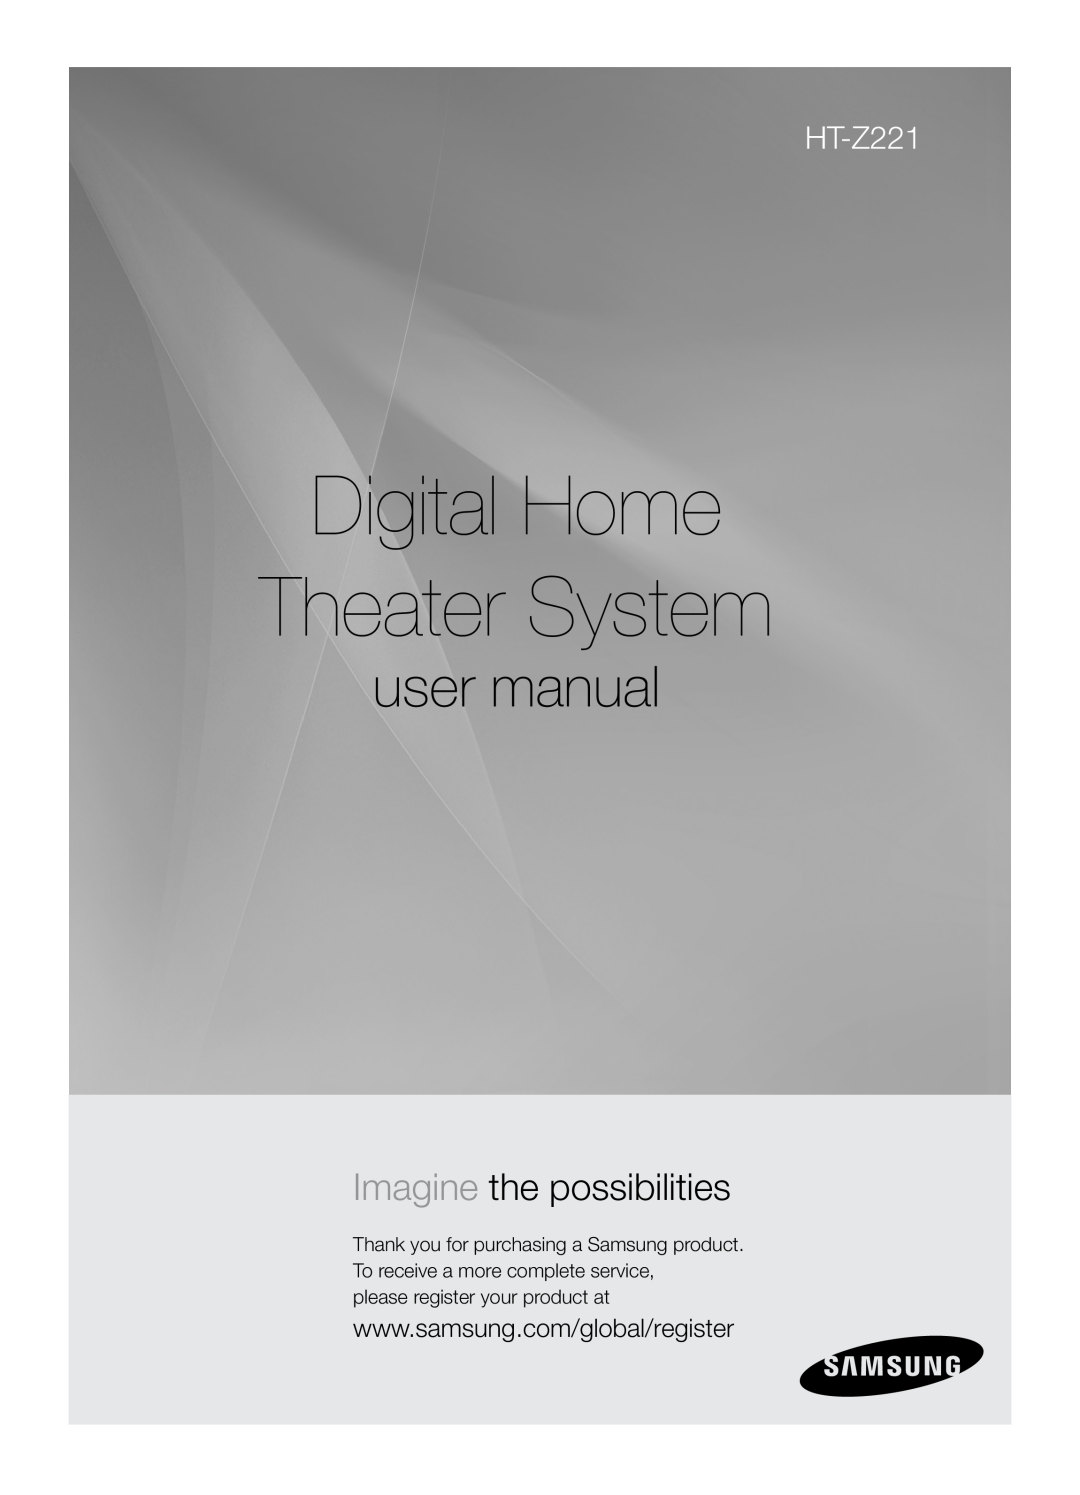 Samsung HT-Z221 user manual Digital Home Theater System, Imagine the possibilities 